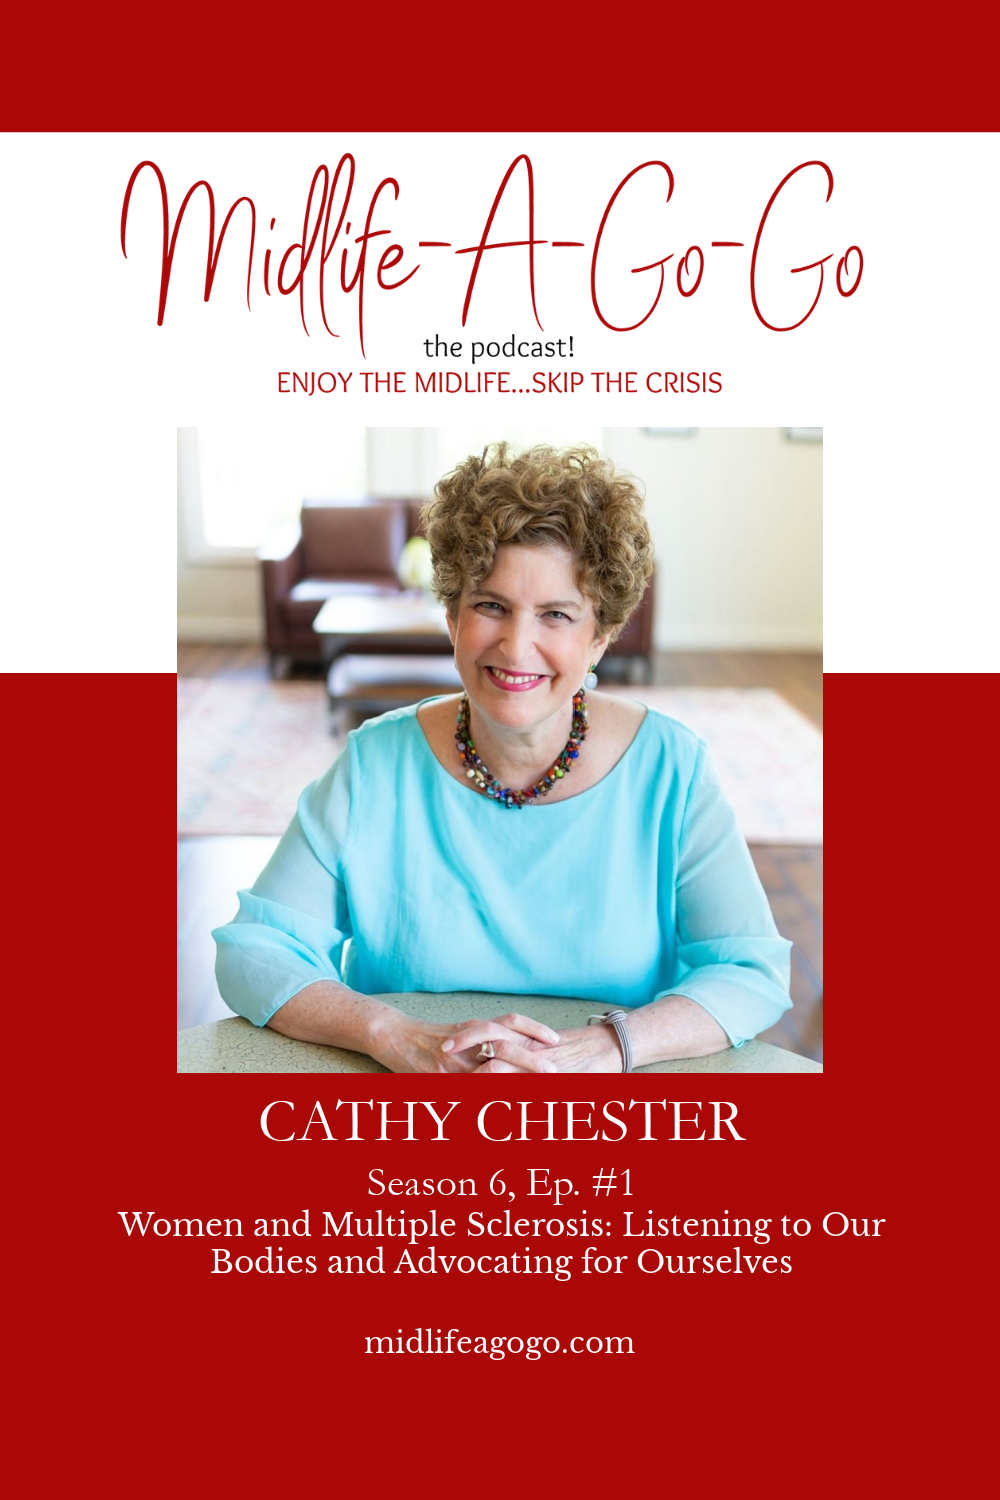 Women and Multiple Sclerosis: Listening to Our Bodies and Advocating for Ourselves with Cathy Chester